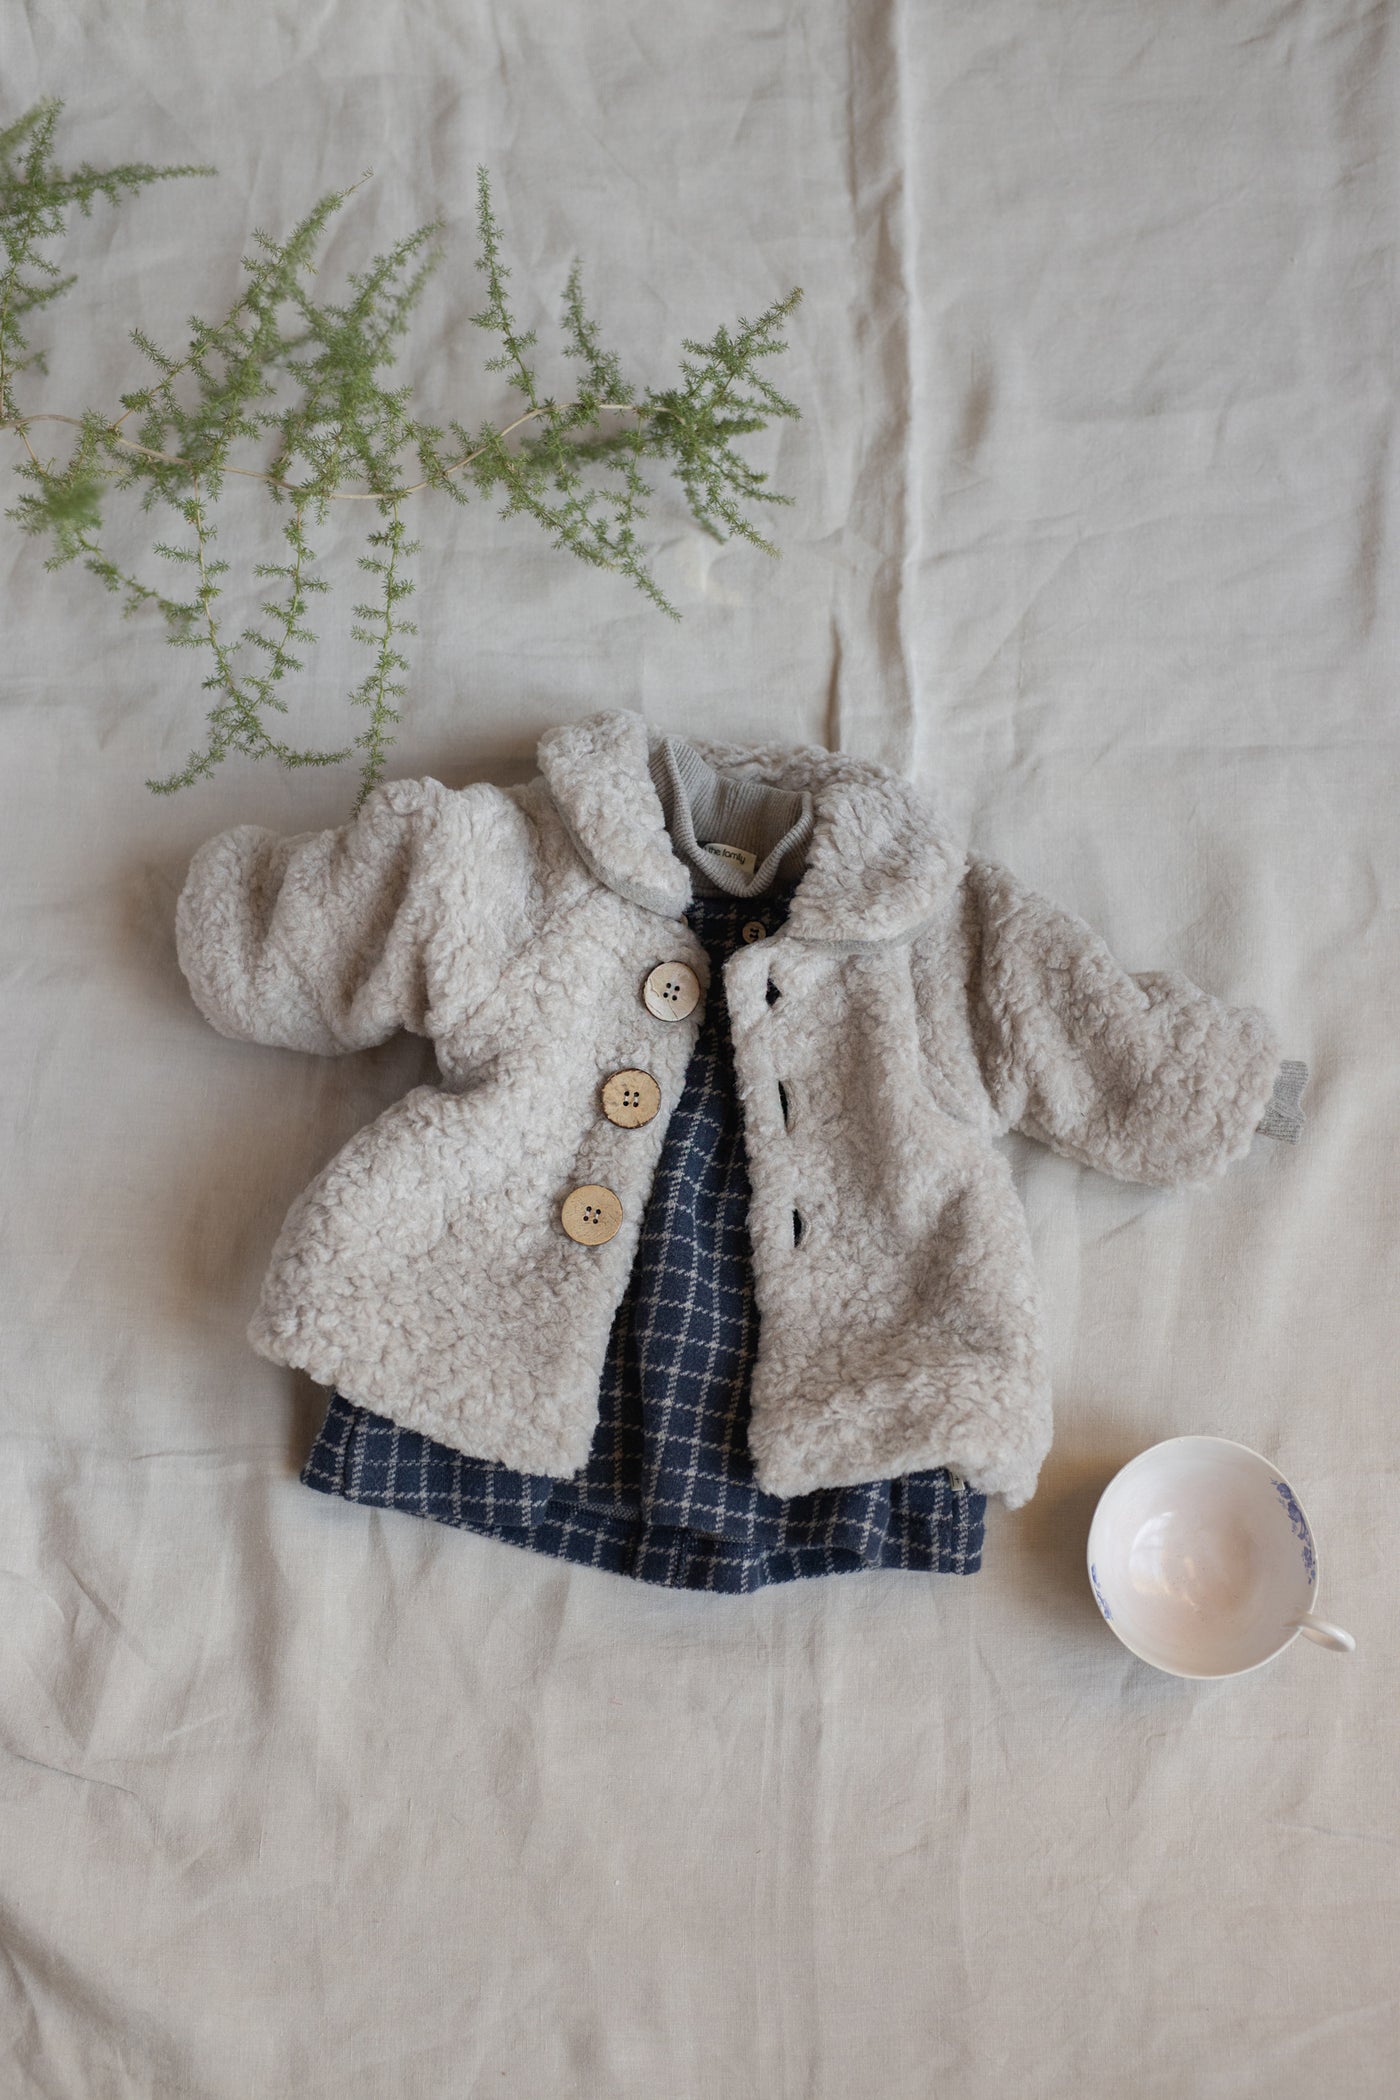 【1＋in the family】【40%OFF】ENEA navy ワンピース 12m,18m,24m,36mのコピー  | Coucoubebe/ククベベ